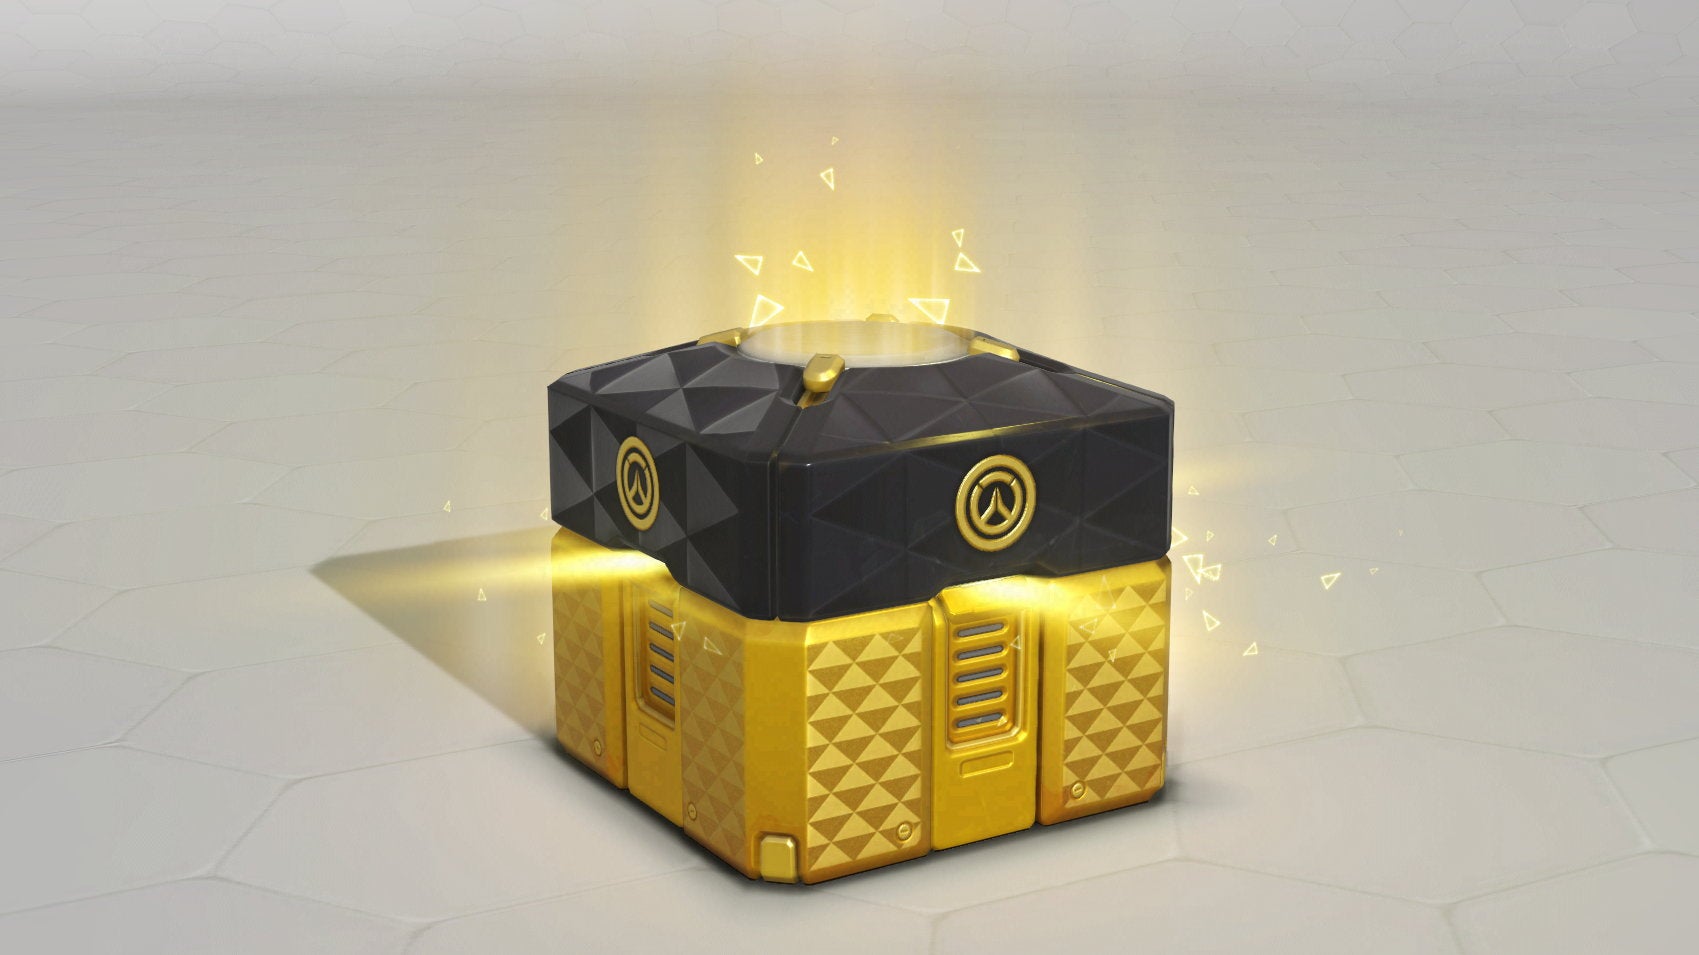 Image for Major developers will disclose odds on loot boxes in effort to avoid government regulation